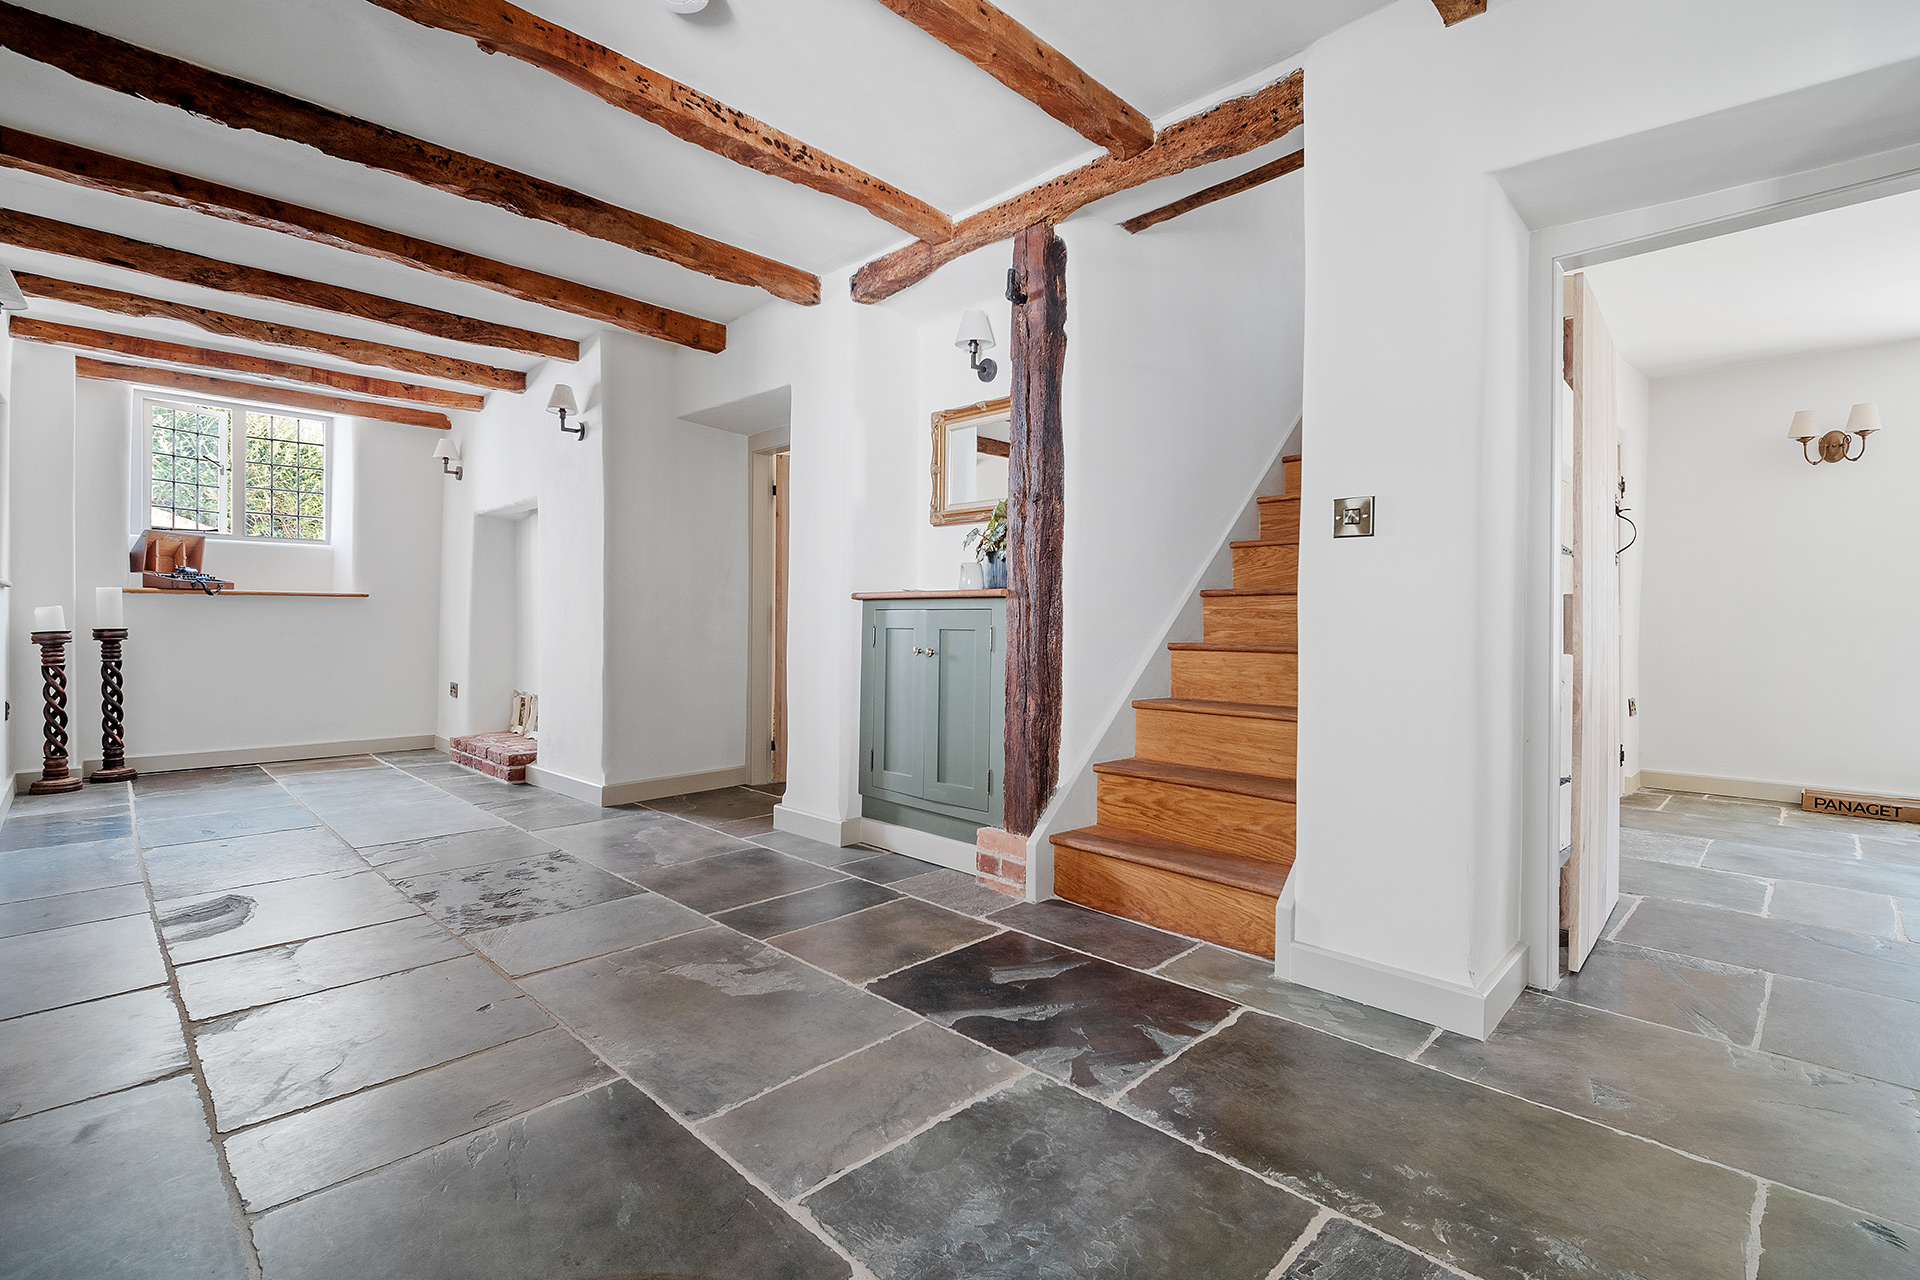 traditional living space with exposed beams, wooden staircase and flagstone floors